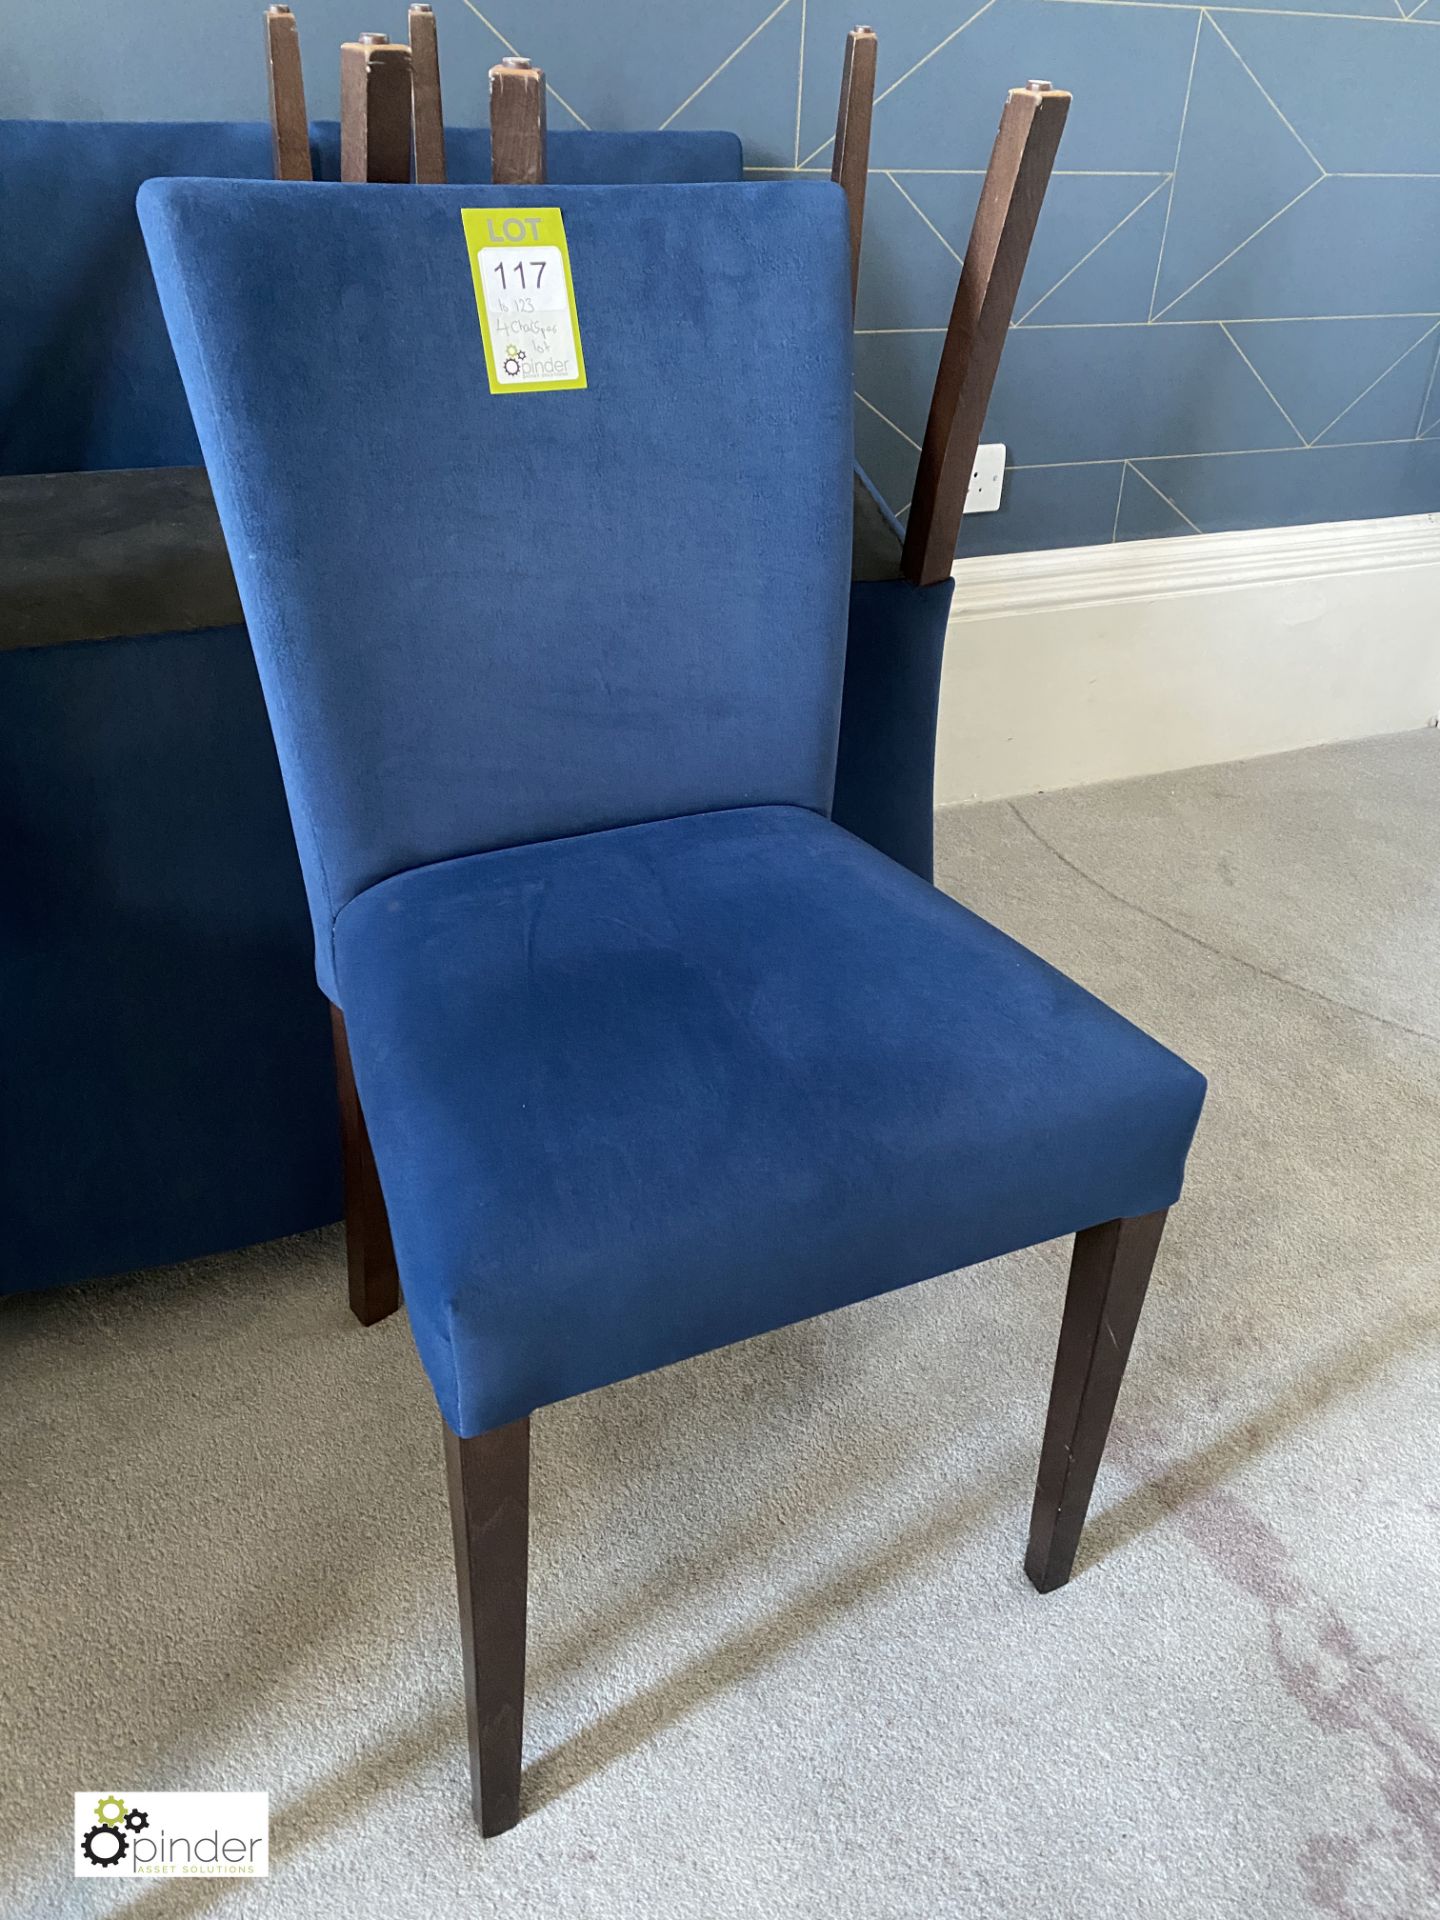 4 upholstered Dining Chairs - Image 2 of 4